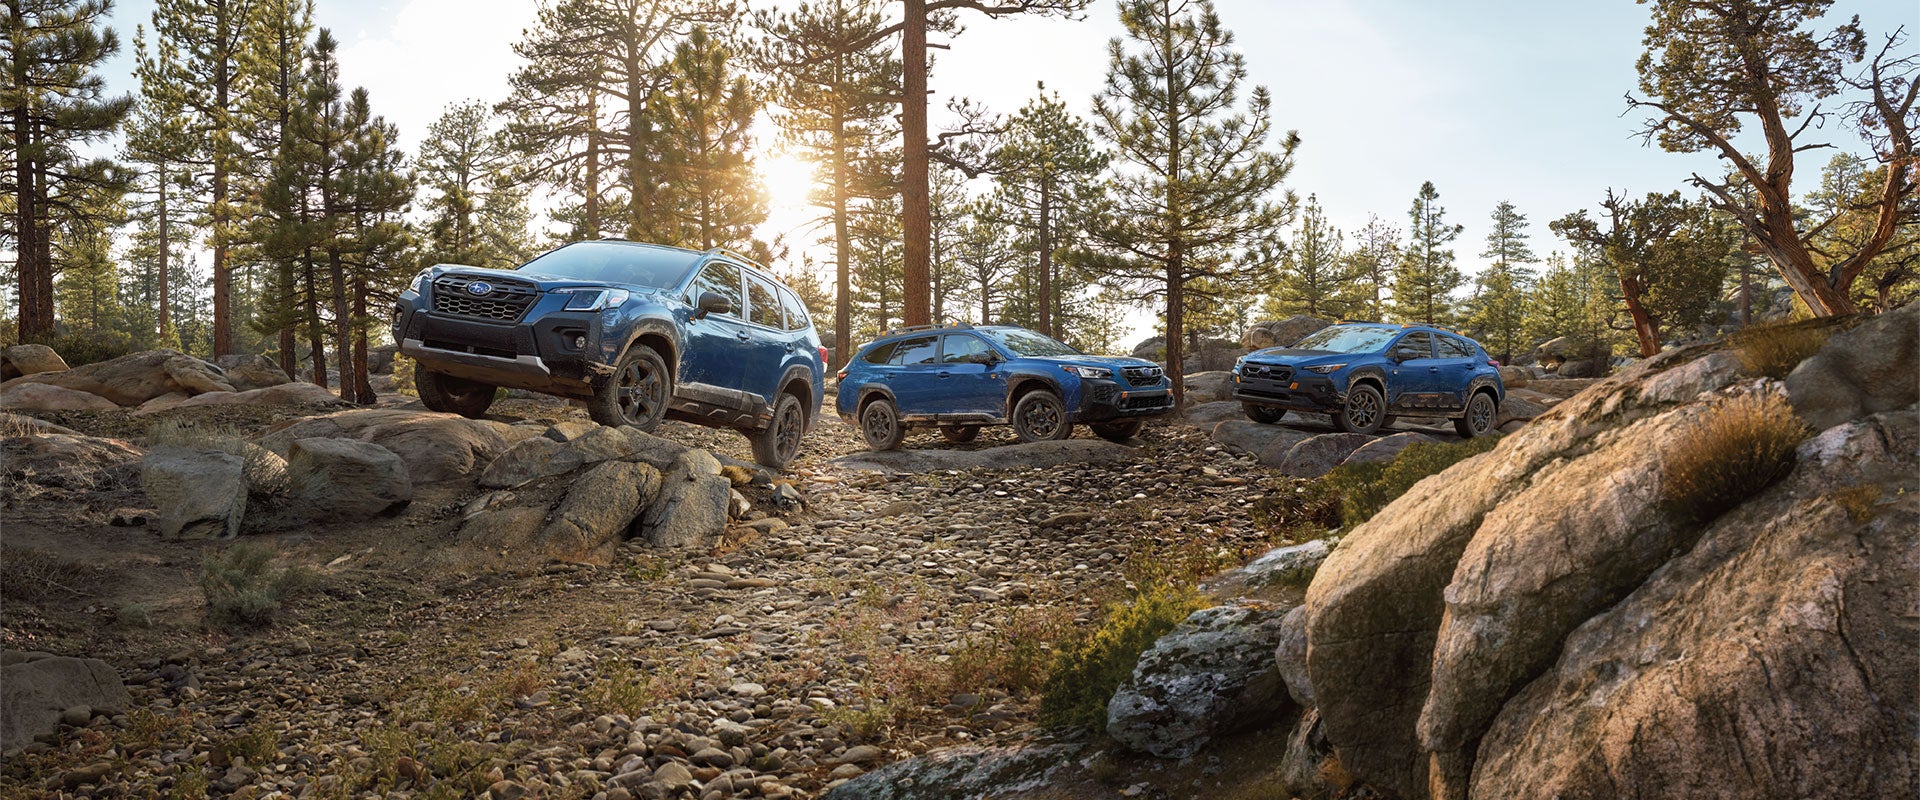 Off-road Subaru Outback Wilderness, Forester Wilderness, and Crosstrek Wilderness SUVs parked in the forest.